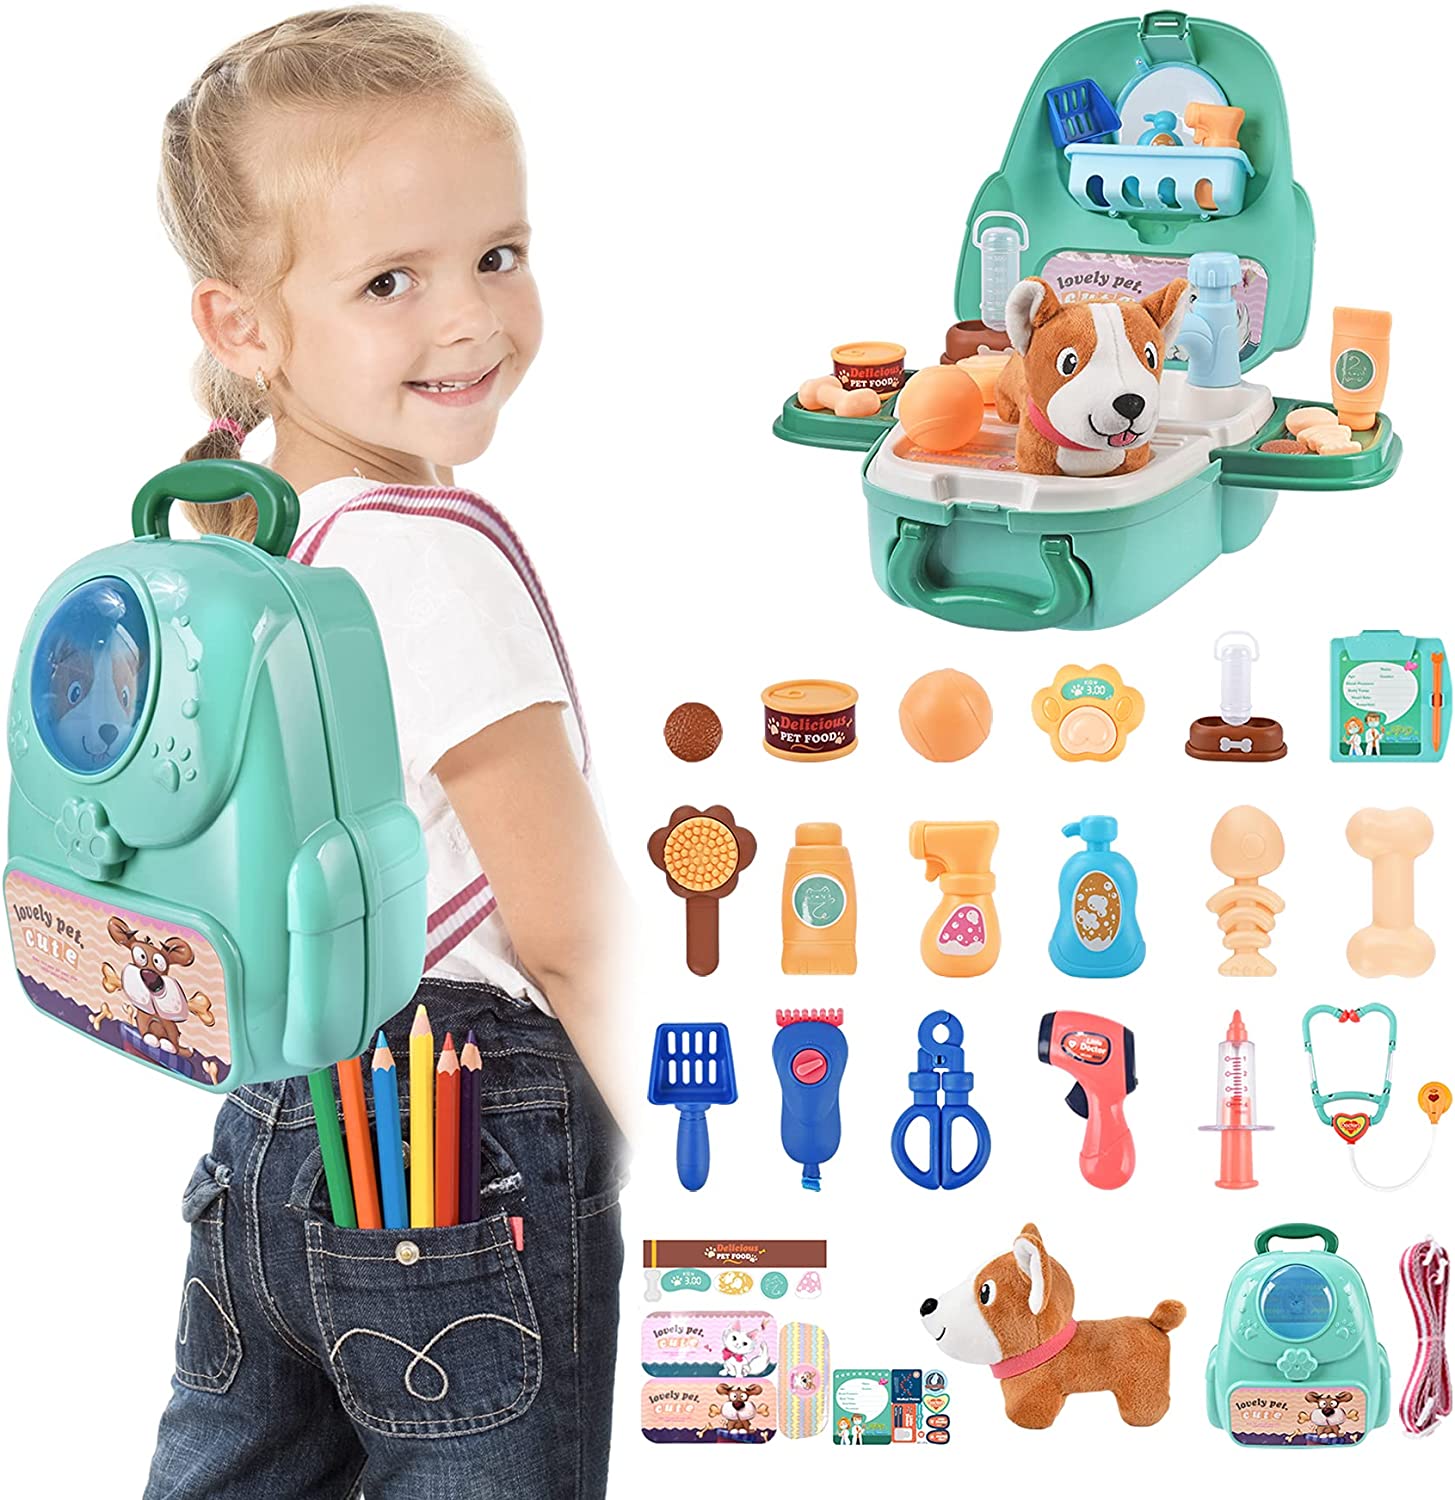 Joyooss Doctor Kit for Kids , with 54pcs Dentist Playset Accessories